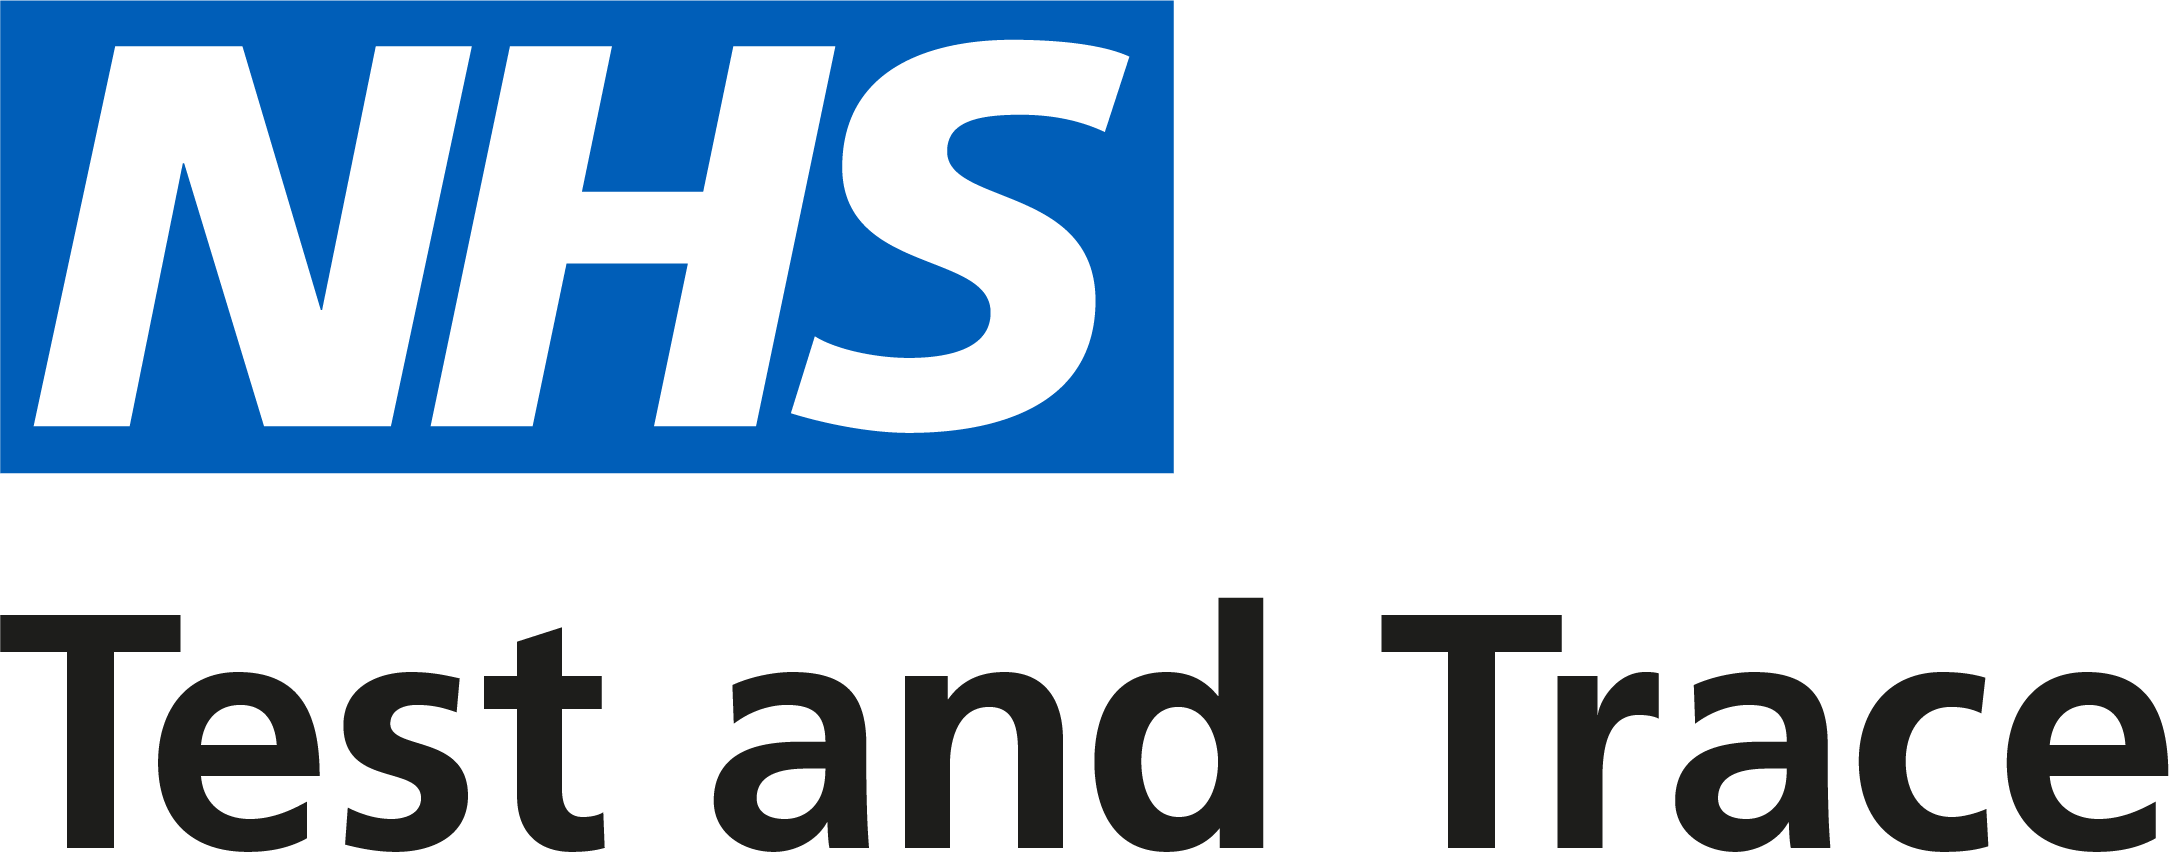 NHS-Test-and-Trace-logo_L_Blue.png